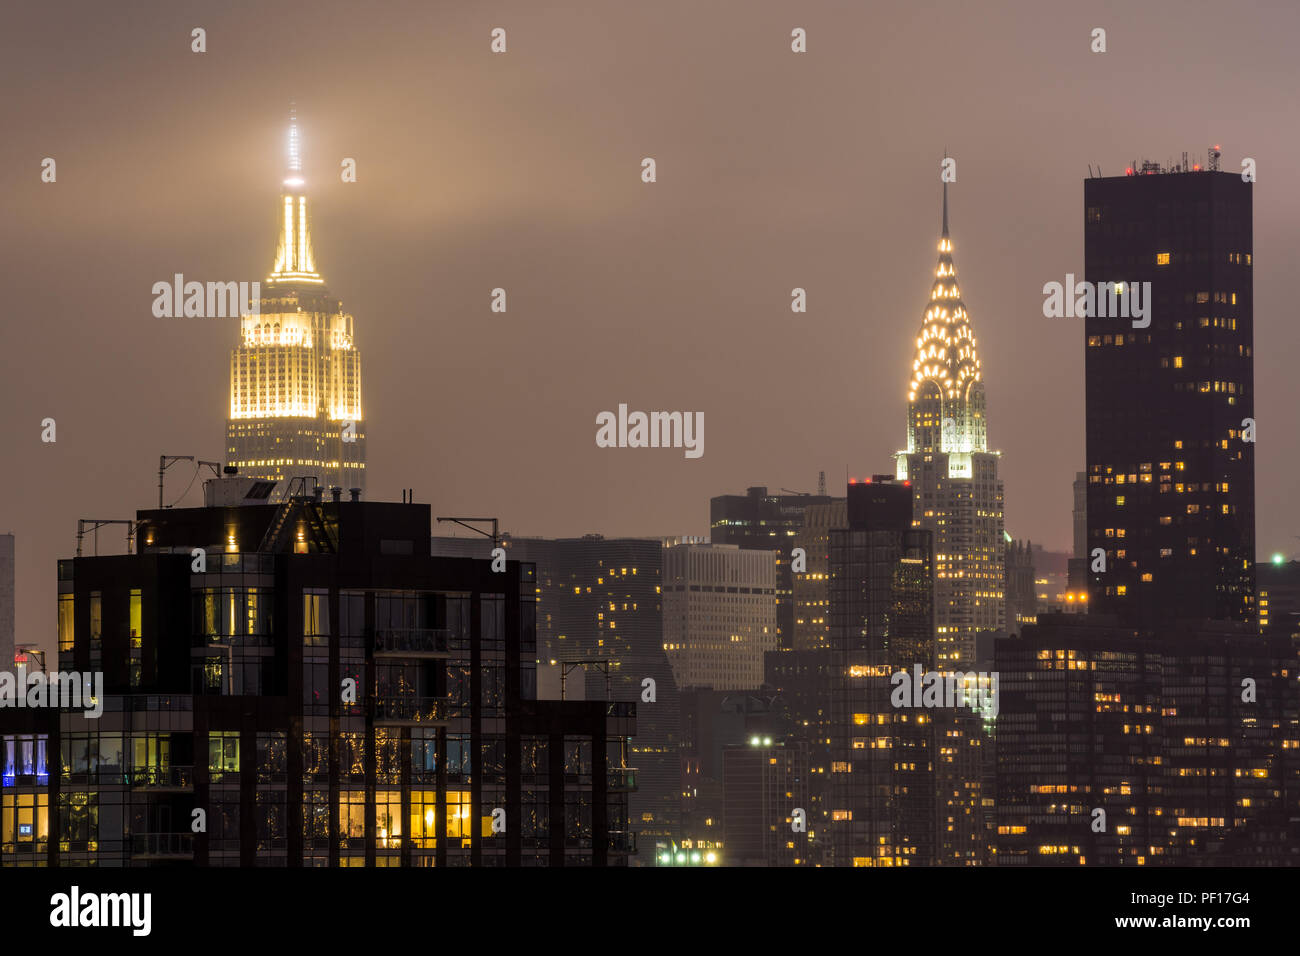 The Empire State Building and the Chrysler Building lit up at night as seen from Long Island City, Queens, New York CIty. Stock Photo